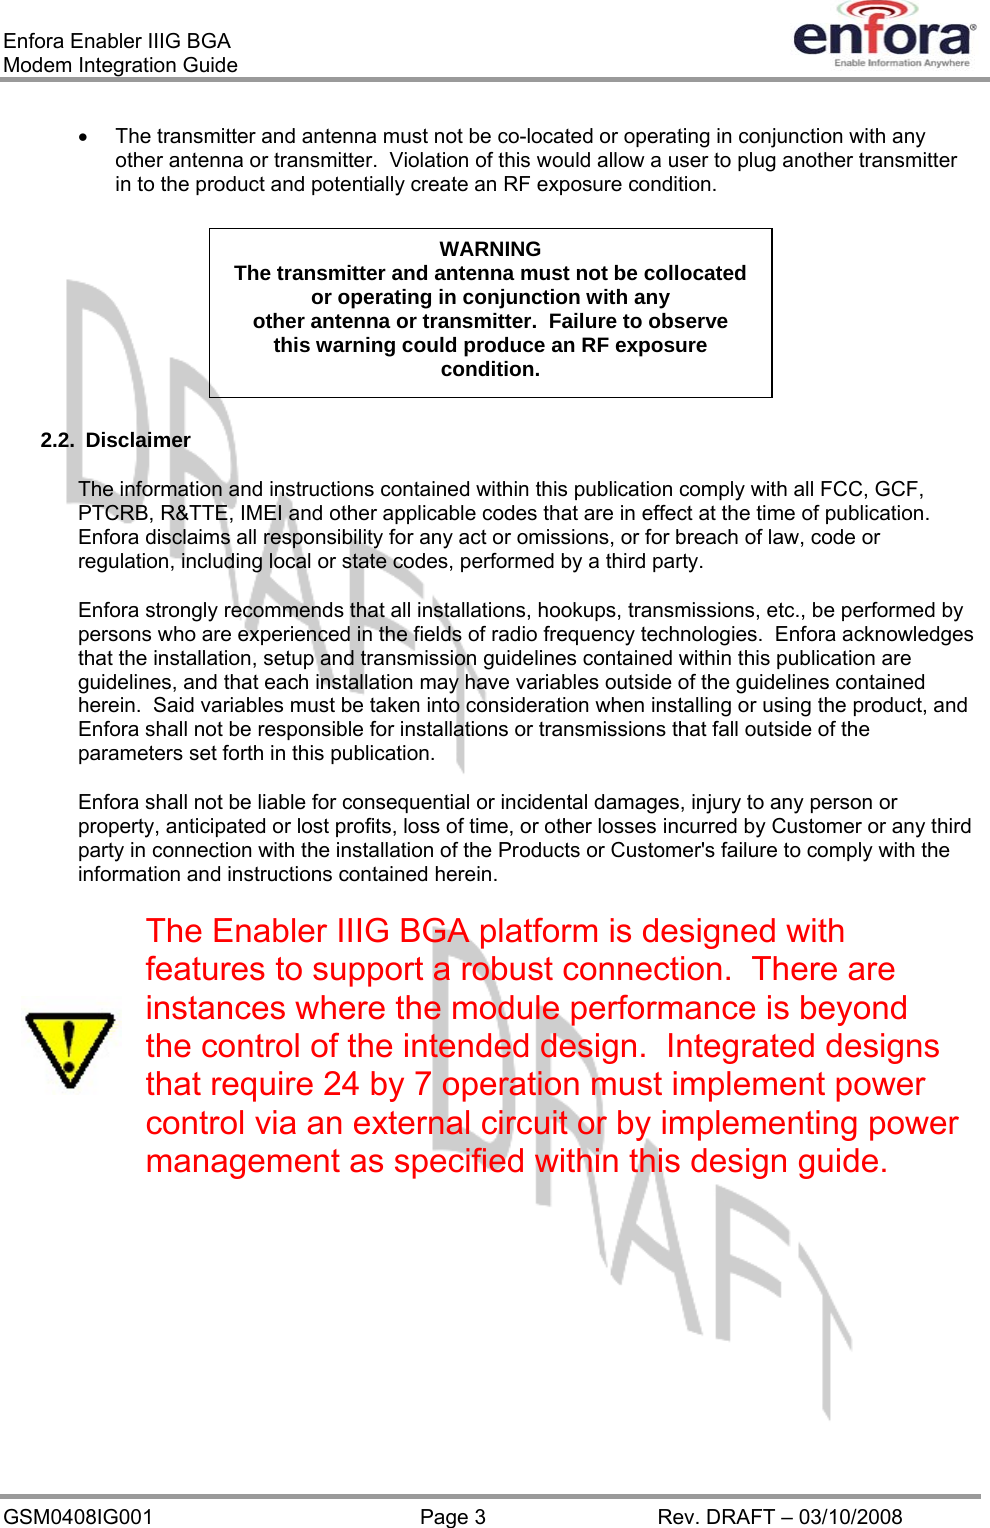 Enfora Enabler IIIG BGA Modem Integration Guide •  The transmitter and antenna must not be co-located or operating in conjunction with any other antenna or transmitter.  Violation of this would allow a user to plug another transmitter in to the product and potentially create an RF exposure condition. WARNING The transmitter and antenna must not be collocated or operating in conjunction with any other antenna or transmitter.  Failure to observe this warning could produce an RF exposure condition. 2.2. Disclaimer The information and instructions contained within this publication comply with all FCC, GCF, PTCRB, R&amp;TTE, IMEI and other applicable codes that are in effect at the time of publication.  Enfora disclaims all responsibility for any act or omissions, or for breach of law, code or regulation, including local or state codes, performed by a third party. Enfora strongly recommends that all installations, hookups, transmissions, etc., be performed by persons who are experienced in the fields of radio frequency technologies.  Enfora acknowledges that the installation, setup and transmission guidelines contained within this publication are guidelines, and that each installation may have variables outside of the guidelines contained herein.  Said variables must be taken into consideration when installing or using the product, and Enfora shall not be responsible for installations or transmissions that fall outside of the parameters set forth in this publication. Enfora shall not be liable for consequential or incidental damages, injury to any person or property, anticipated or lost profits, loss of time, or other losses incurred by Customer or any third party in connection with the installation of the Products or Customer&apos;s failure to comply with the information and instructions contained herein. The Enabler IIIG BGA platform is designed with features to support a robust connection.  There are instances where the module performance is beyond the control of the intended design.  Integrated designs that require 24 by 7 operation must implement power control via an external circuit or by implementing power management as specified within this design guide.   GSM0408IG001  Page 3  Rev. DRAFT – 03/10/2008 